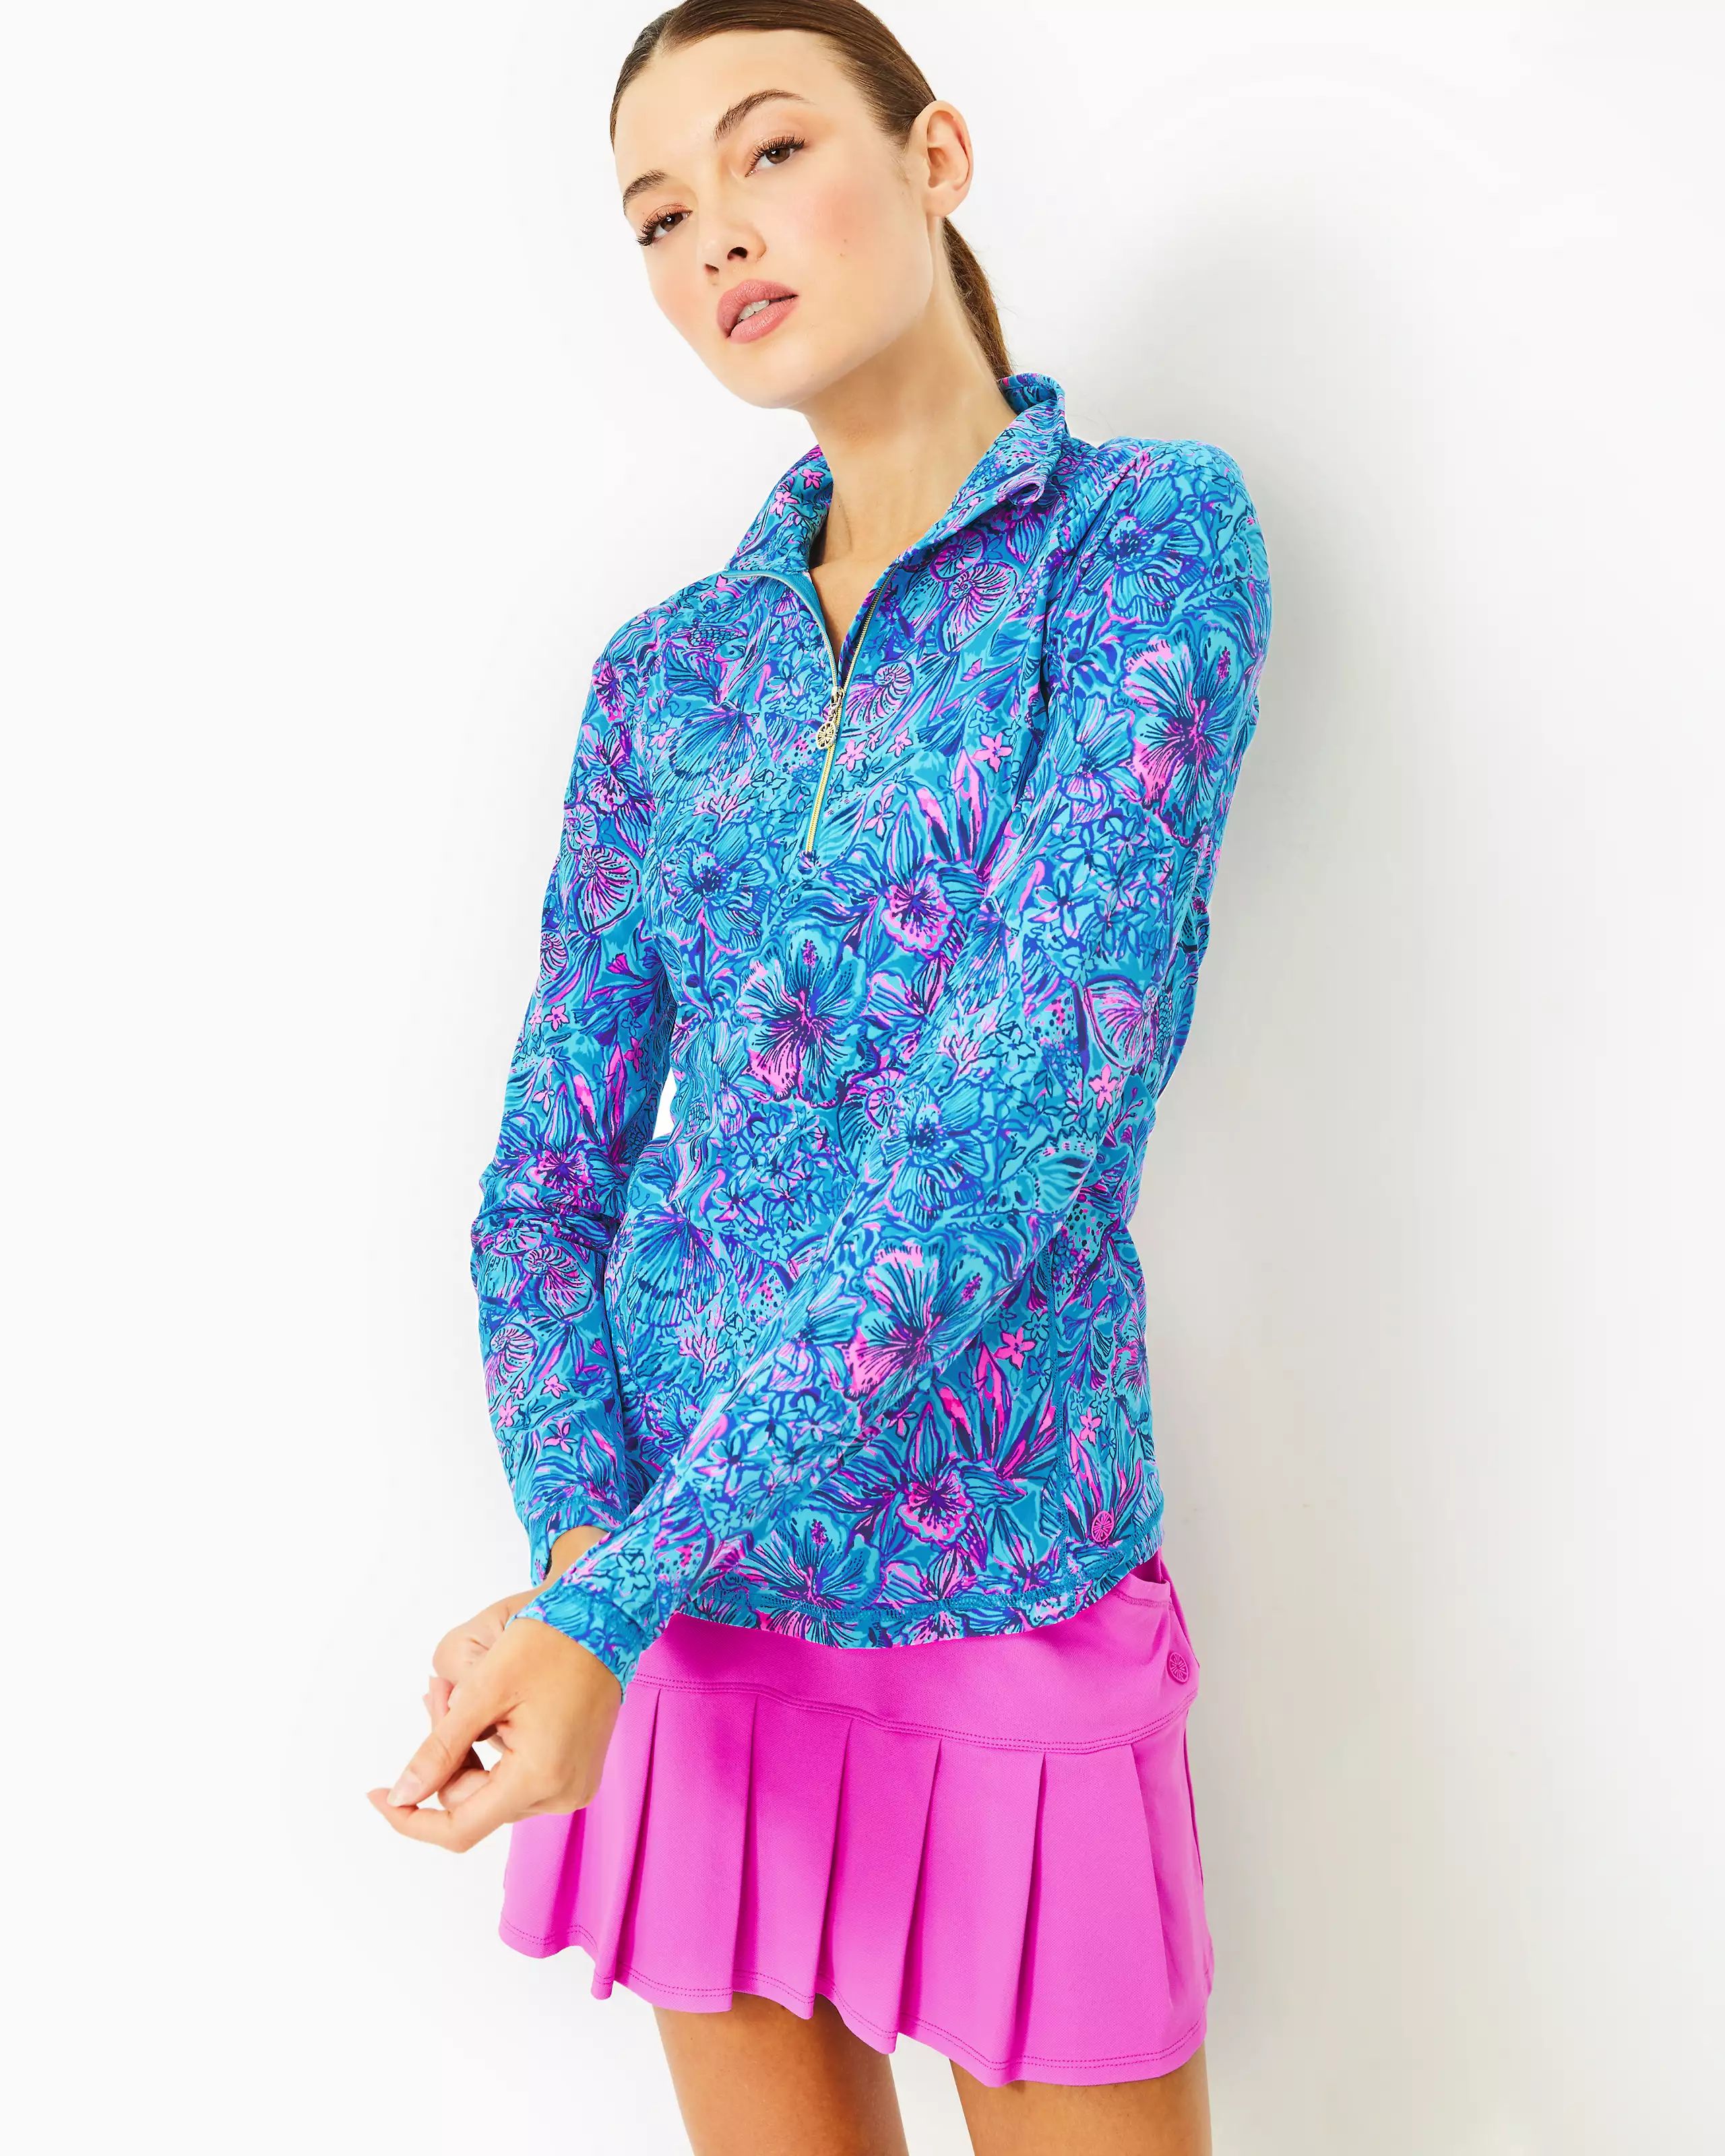 UPF 50+ Luxletic Justine Pullover | Lilly Pulitzer | Lilly Pulitzer